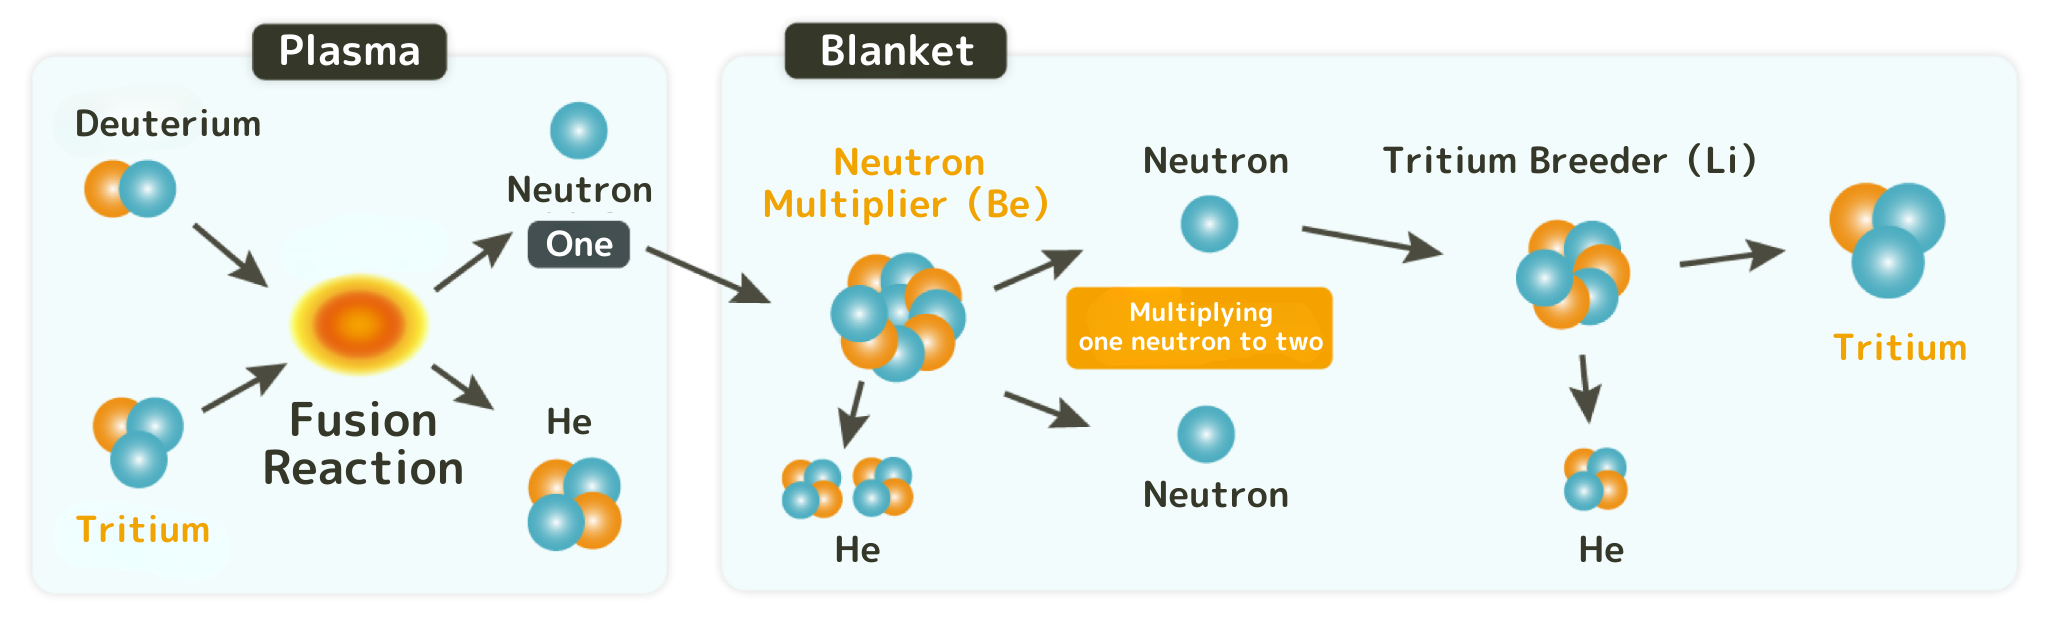 Fusion reactions are caused by ultrafast collisions of deuterium and tritium in plasma. However, tritium is rarely found naturally thus it have to be self-generated in the blanket.<br />
This requires beryllium (neutron multiplier), which doubles the number of neutrons to two.